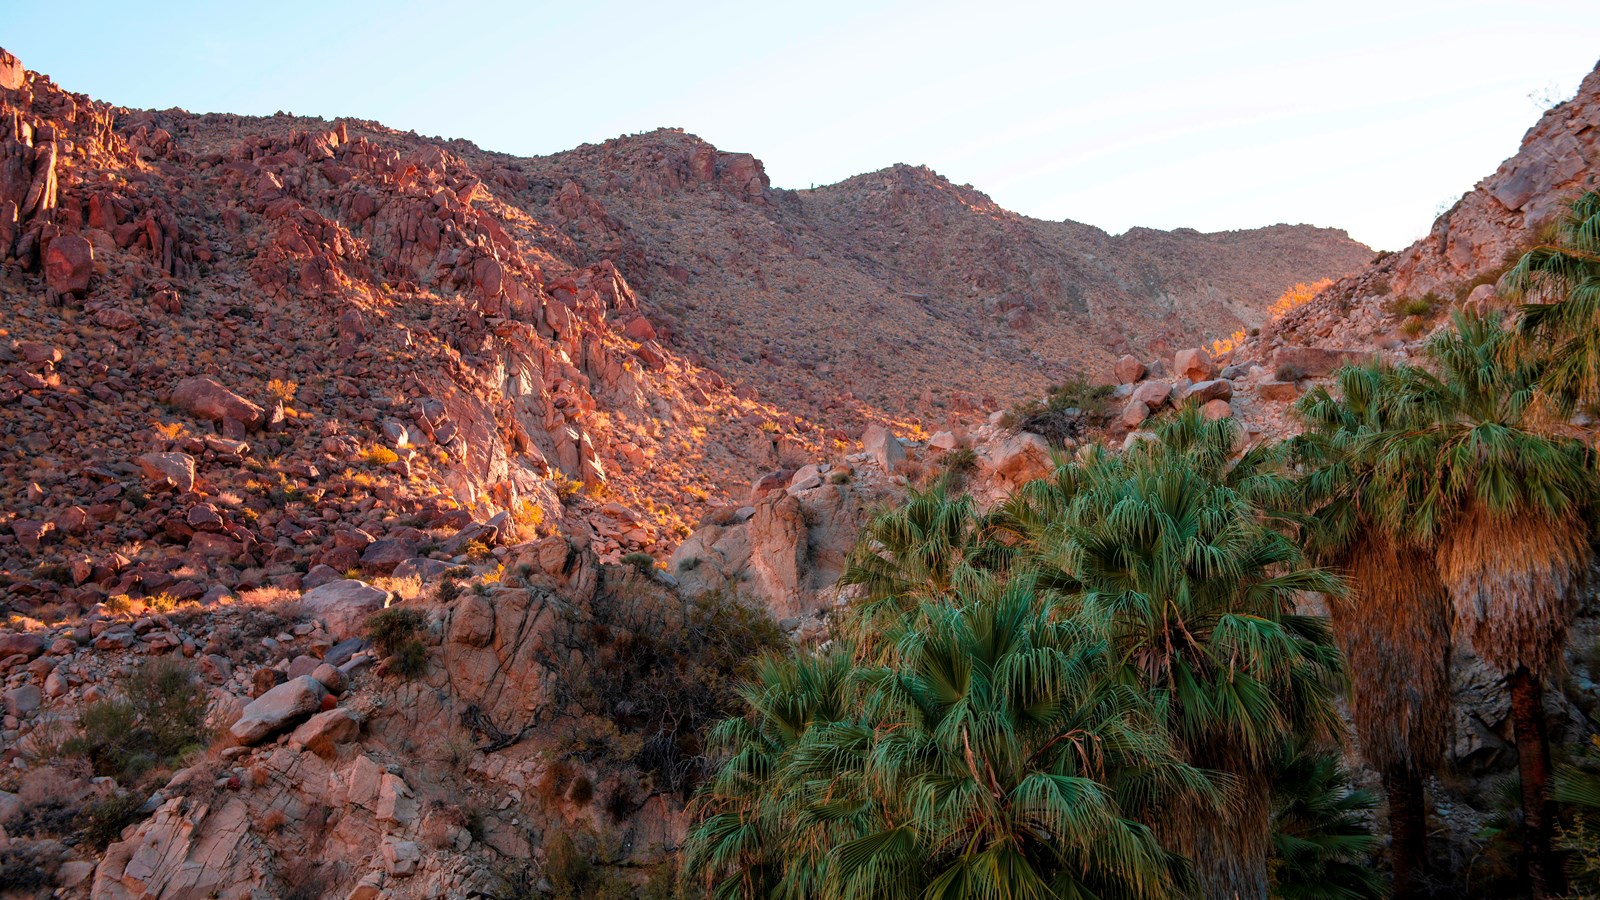 A group of desert palms in a rocky canyon with the sunrise lighting up the far canyon wall.